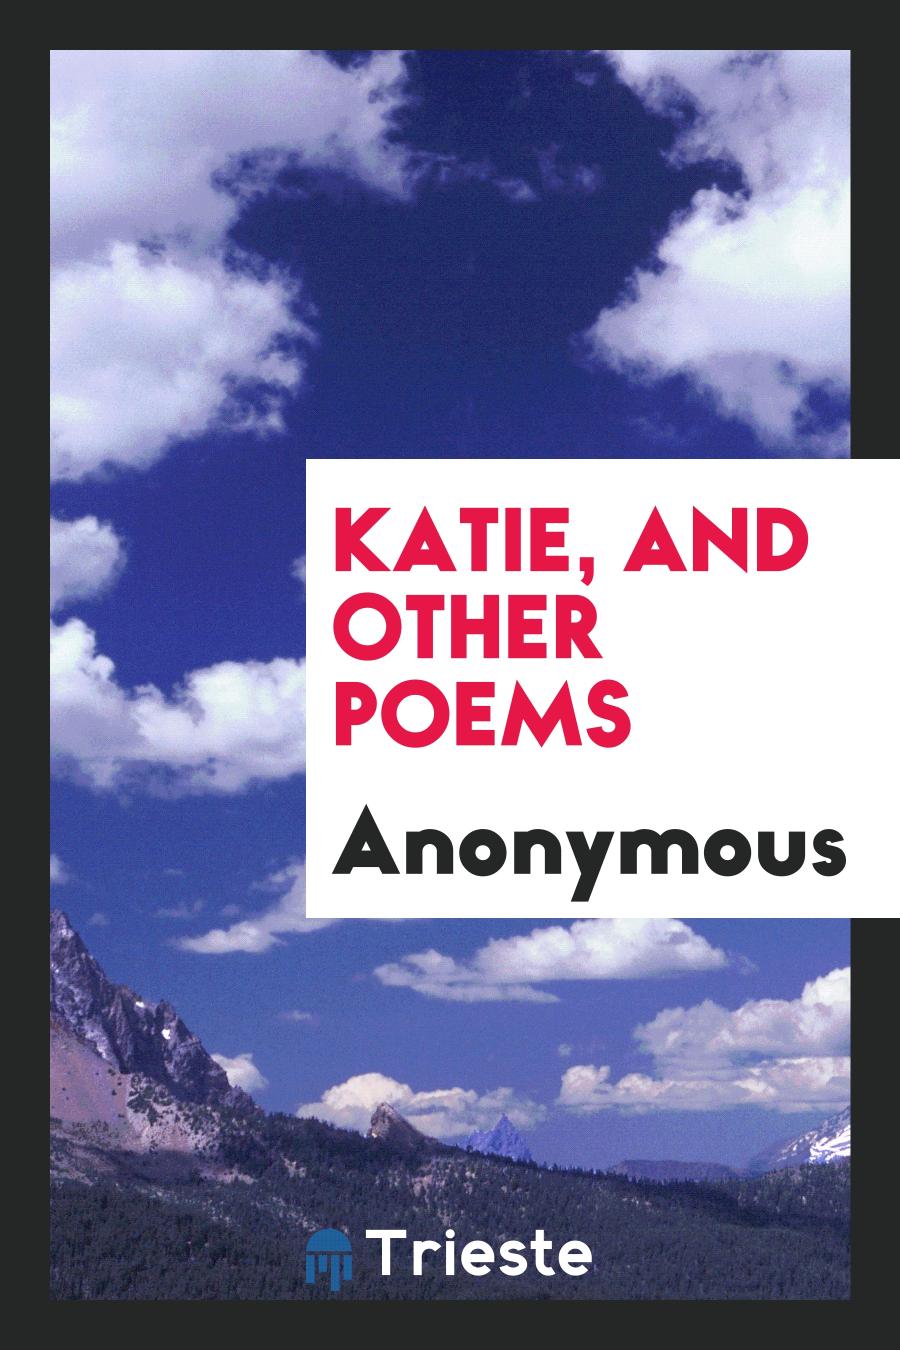 Katie, and Other Poems